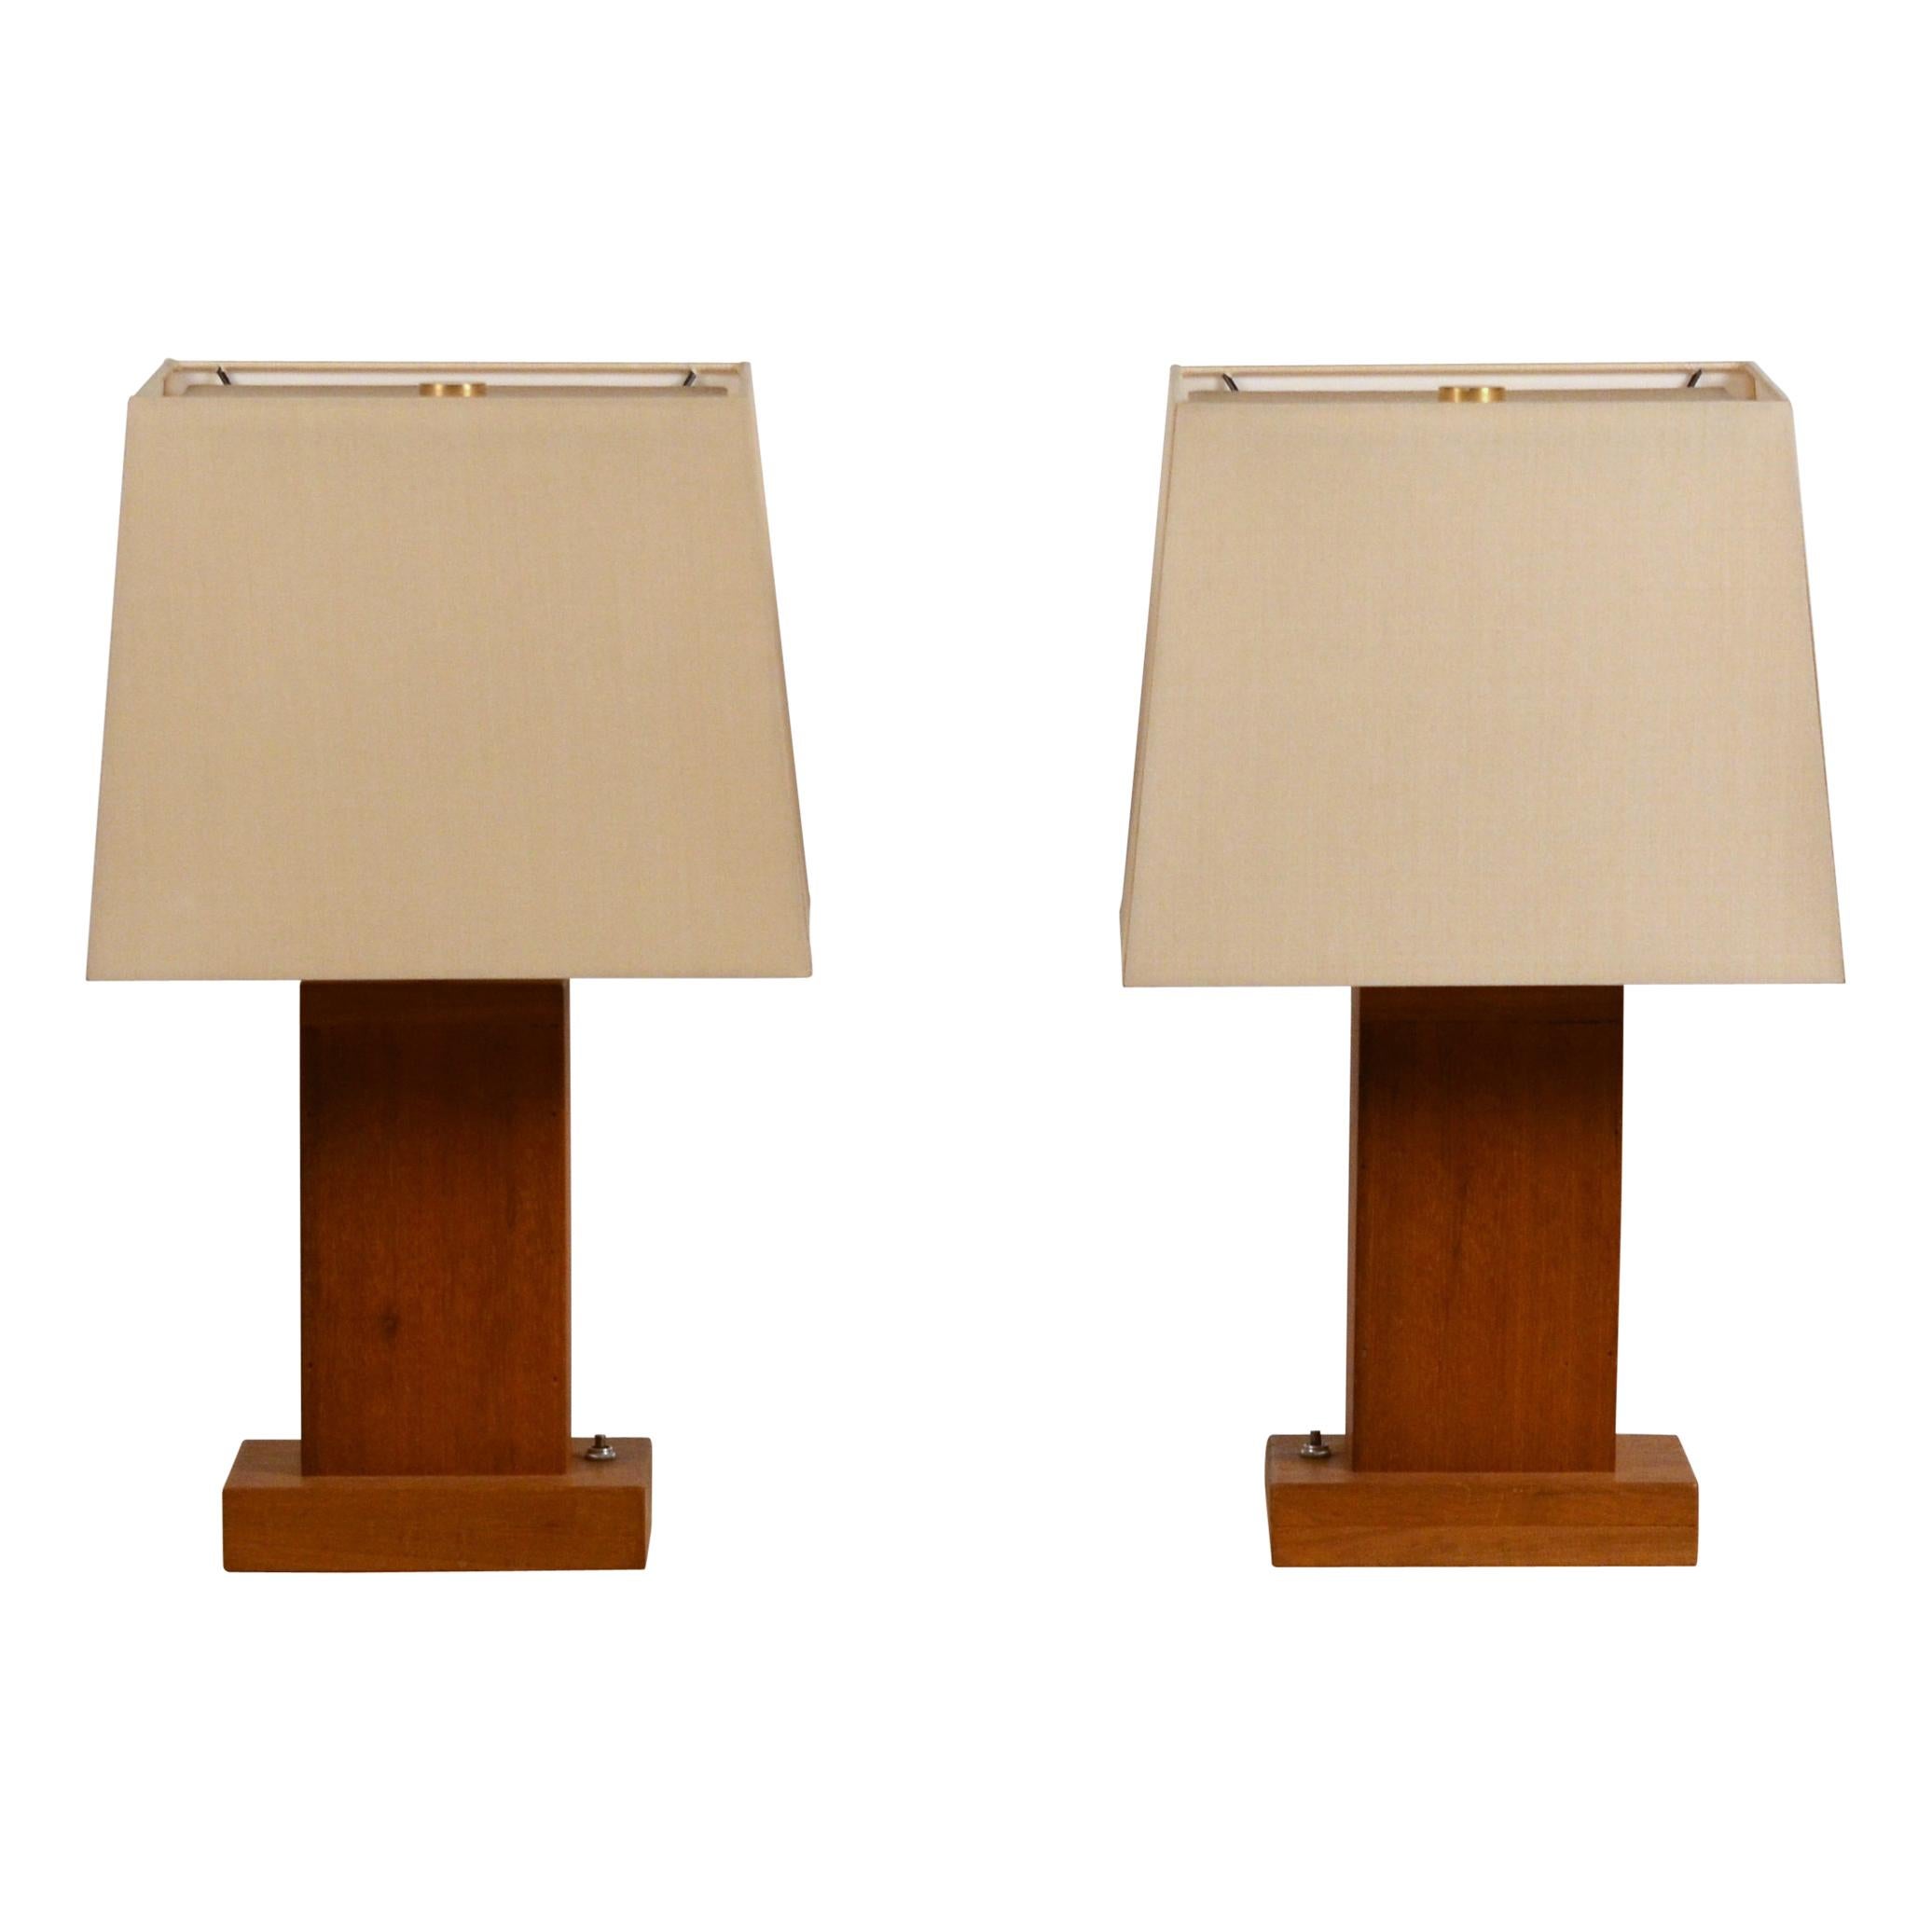 Pair of Chic Cubist Bedside / Table Lamps with Custom Silk Shades